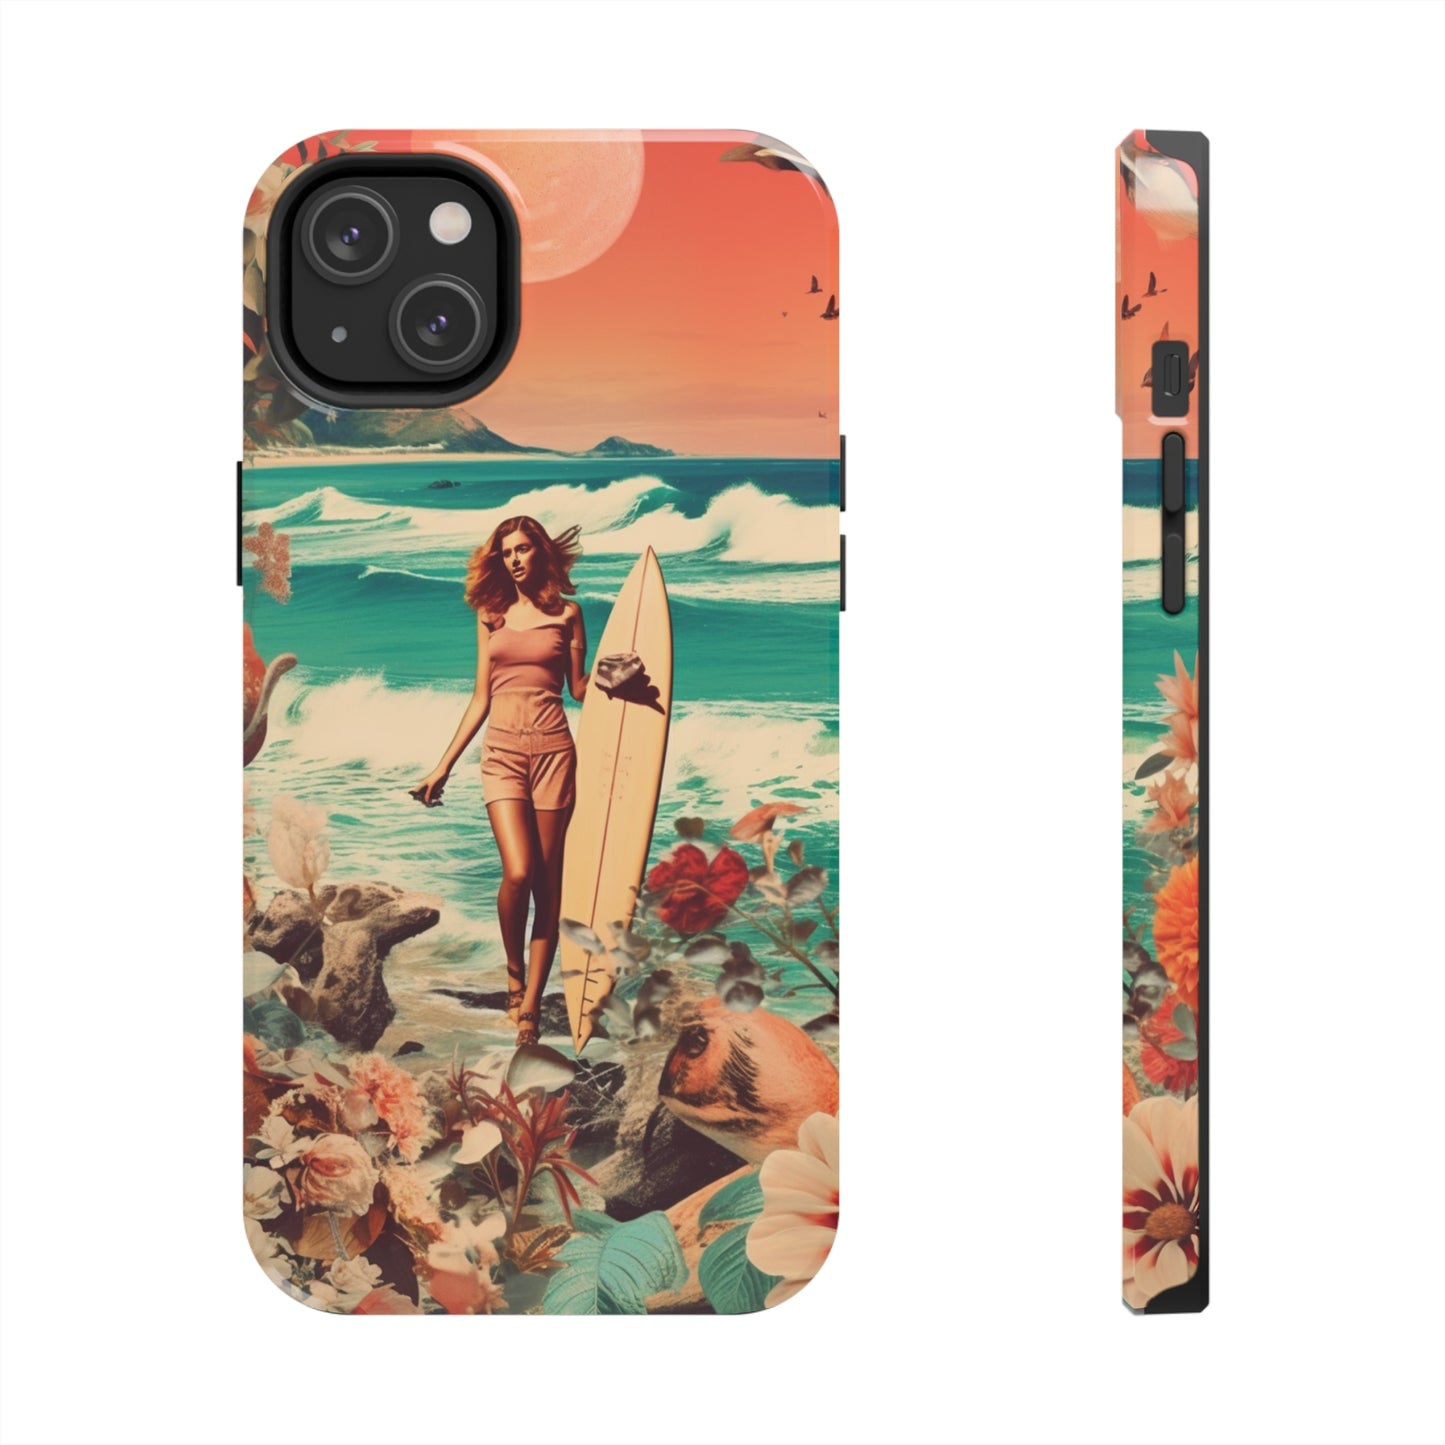 Summertime Beach Time iPhone Tough Case | Embrace the Coastal Vibe with Reliable Protection